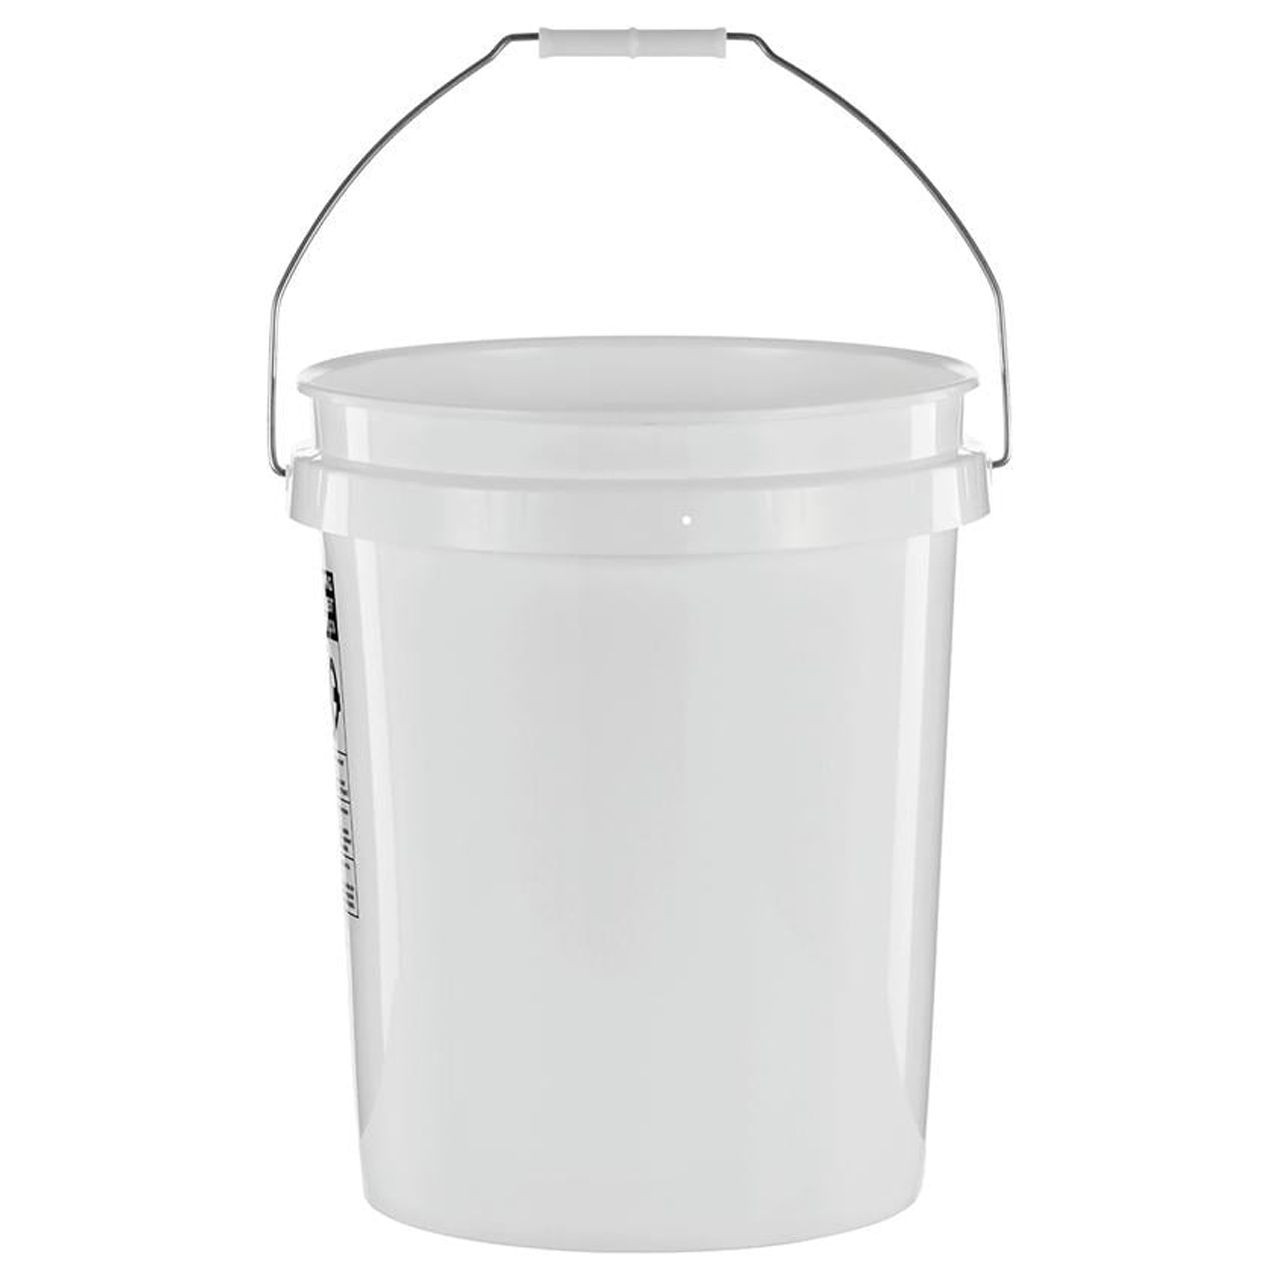 Argee 3.5 Gallon White Bucket, 10-Pack 